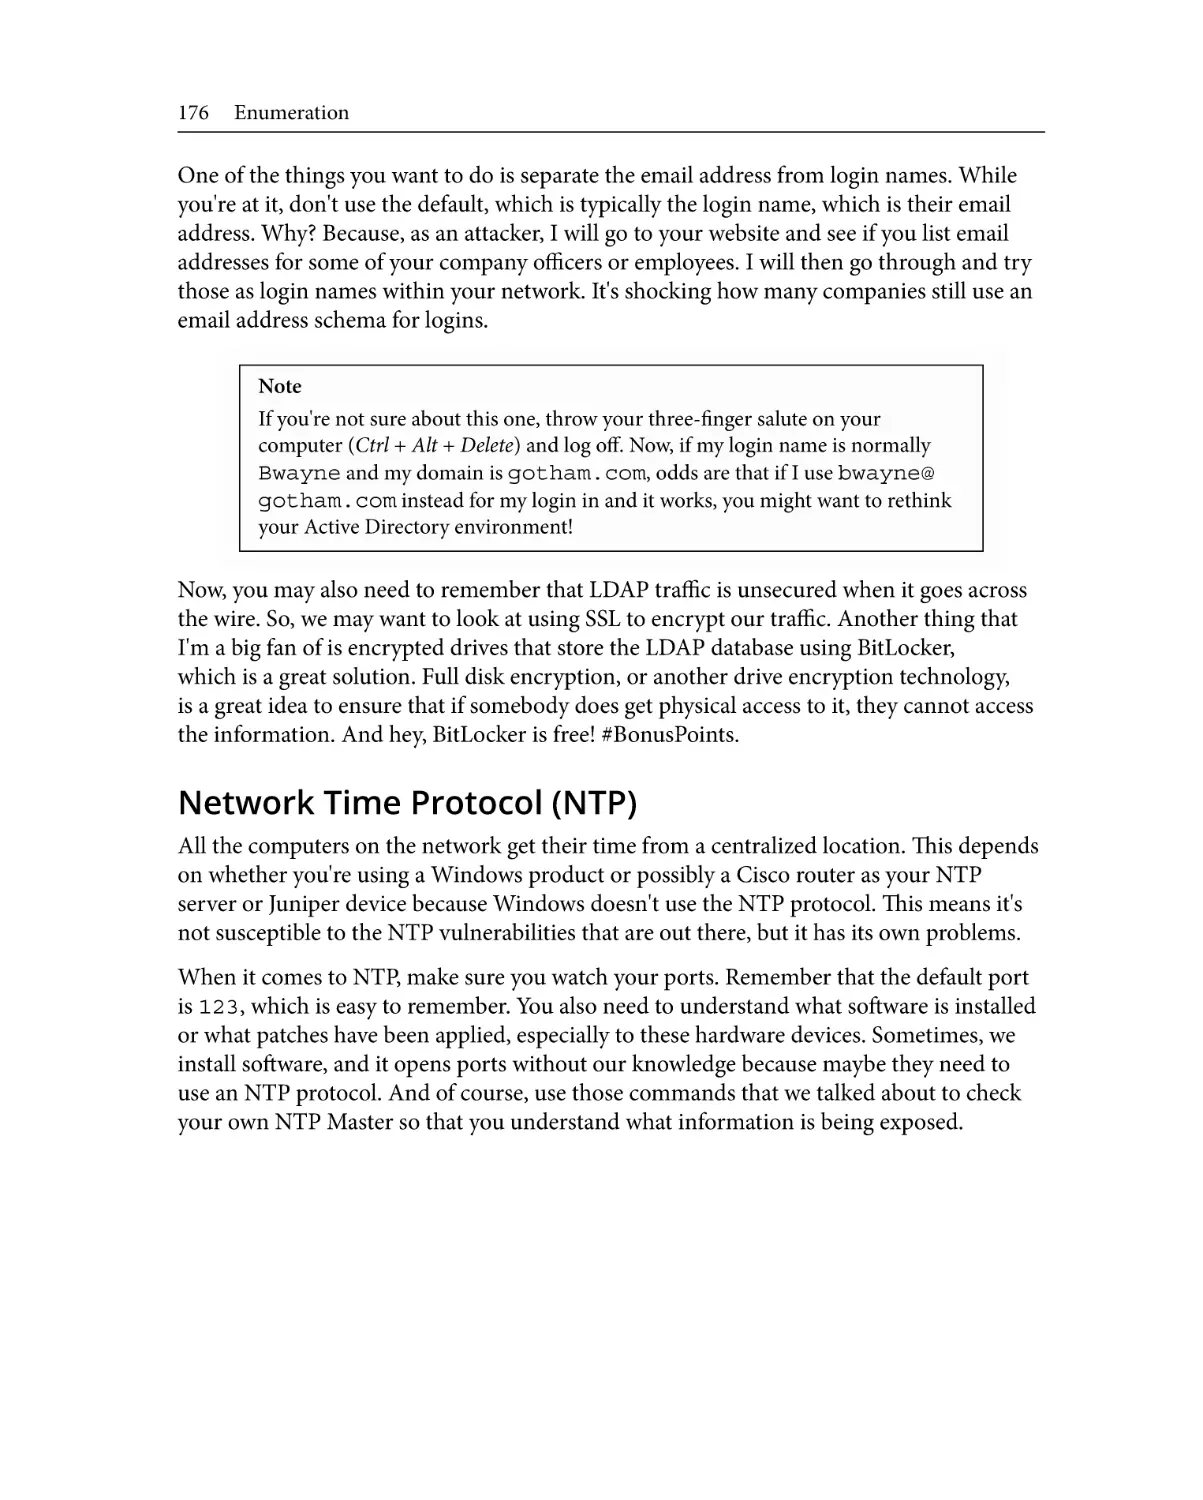 Network Time Protocol (NTP)